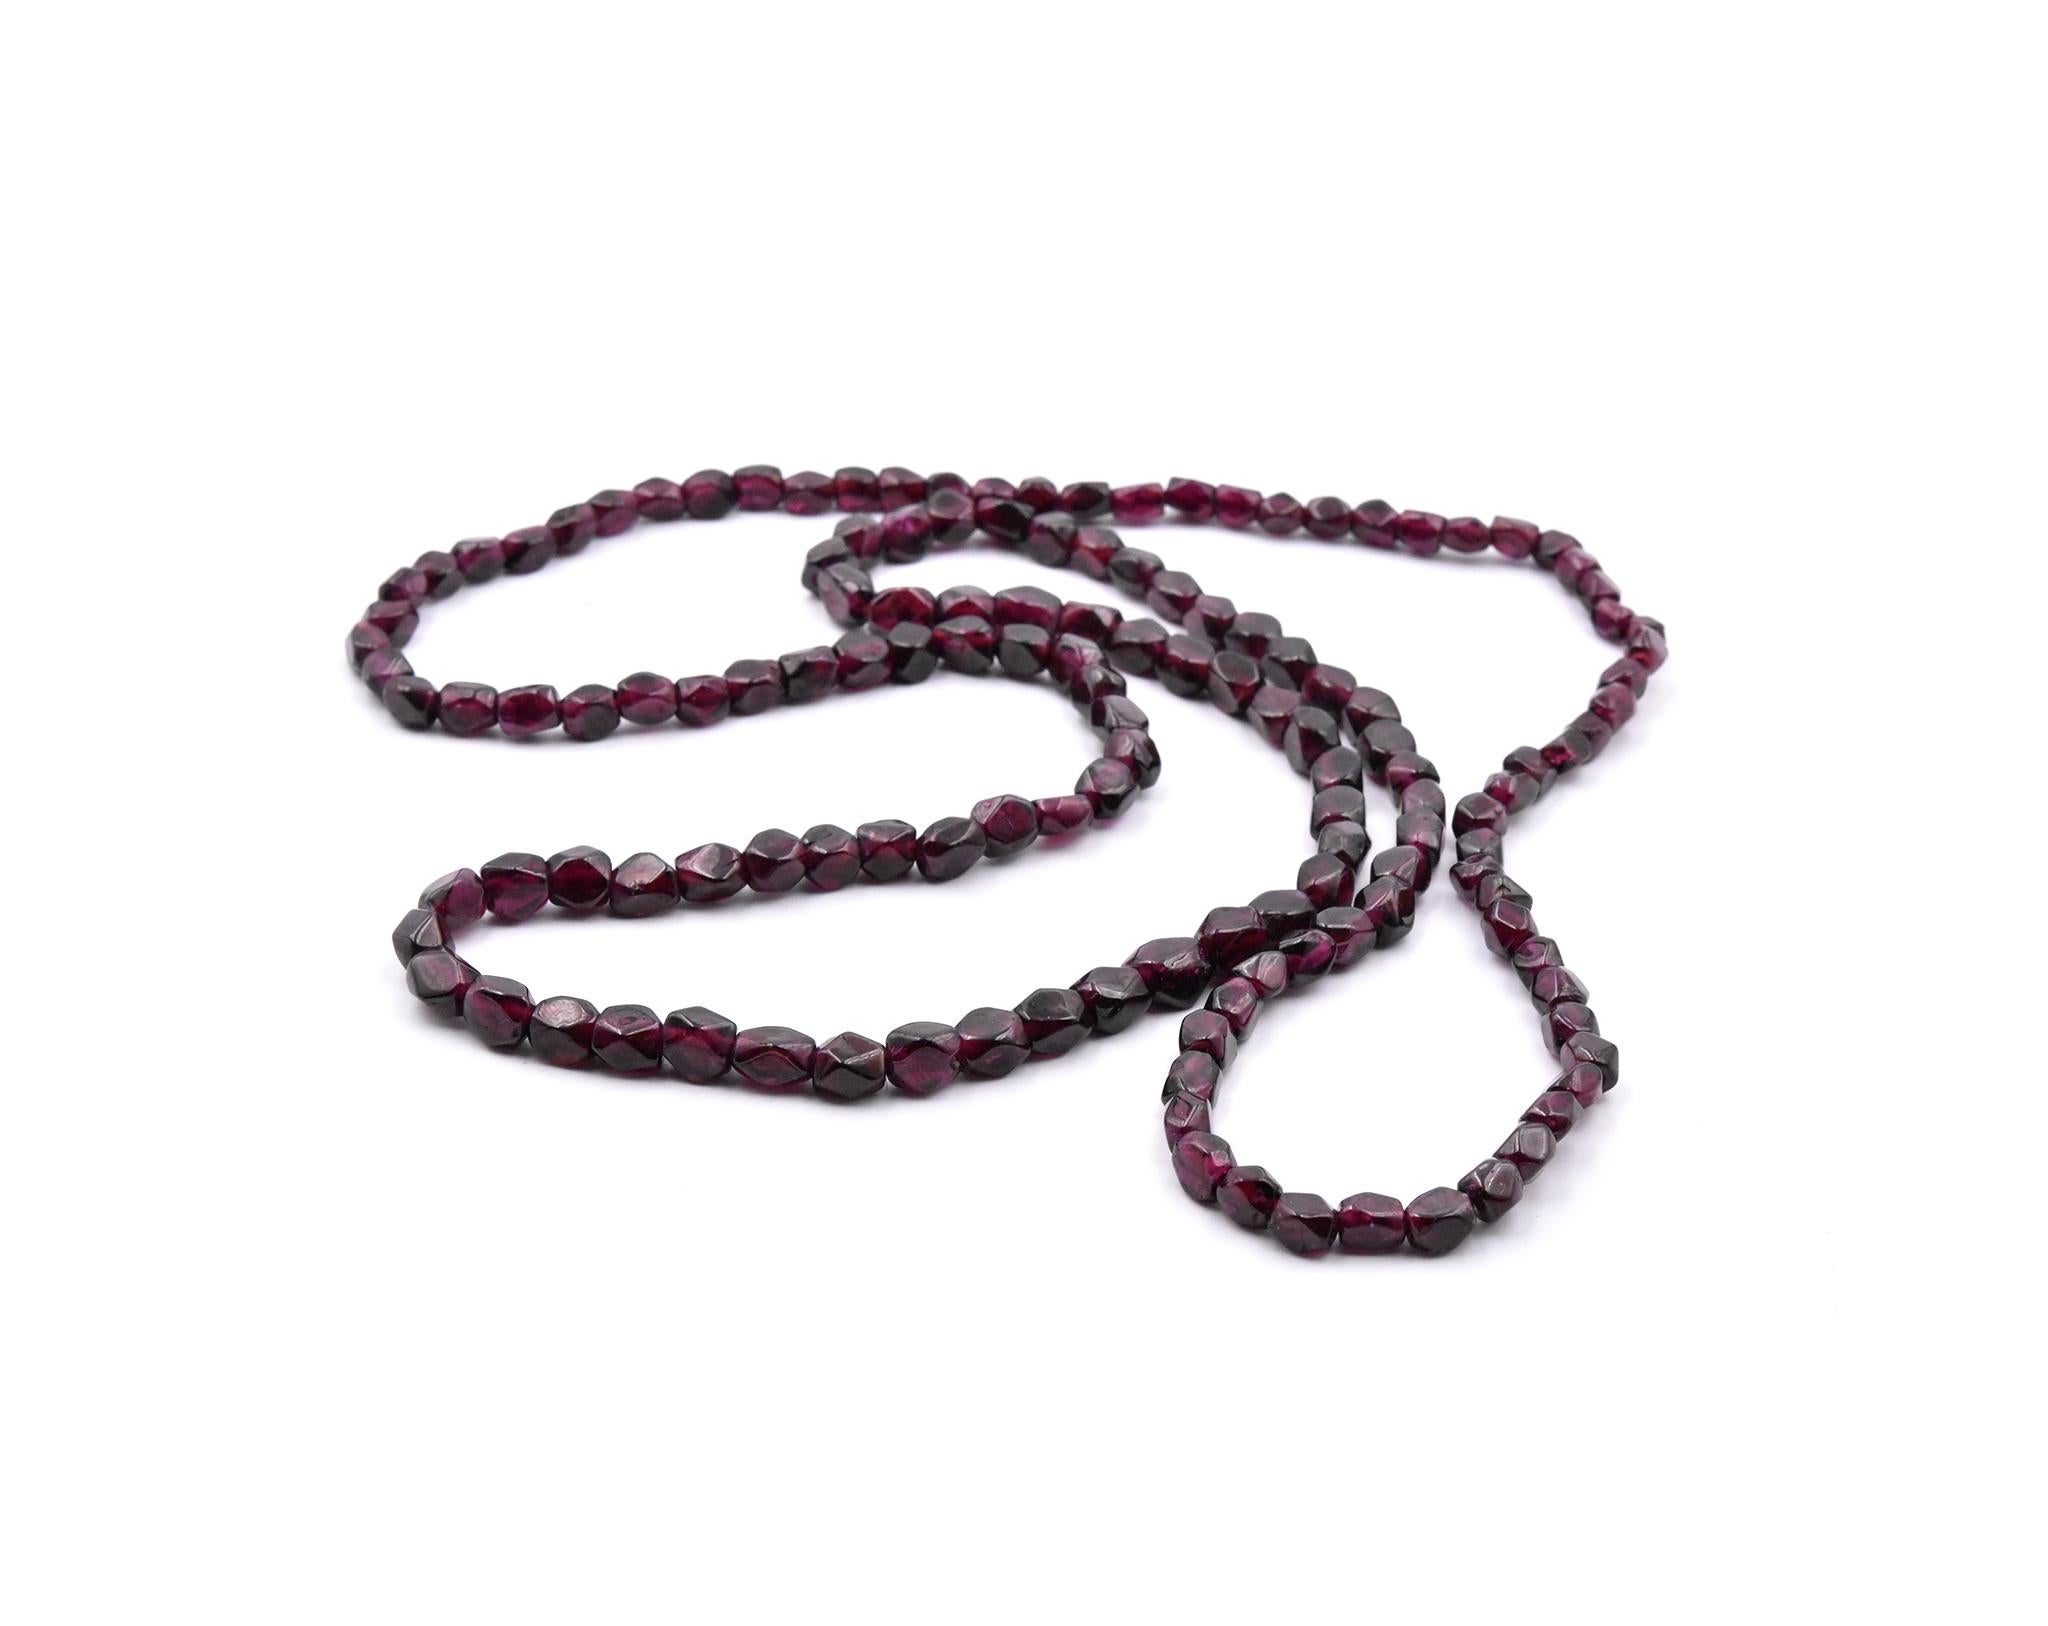 Material: Garnet beads
Dimensions: necklace is 34-inches in length, beads are about 6mm wide
Weight: 64.8 grams
